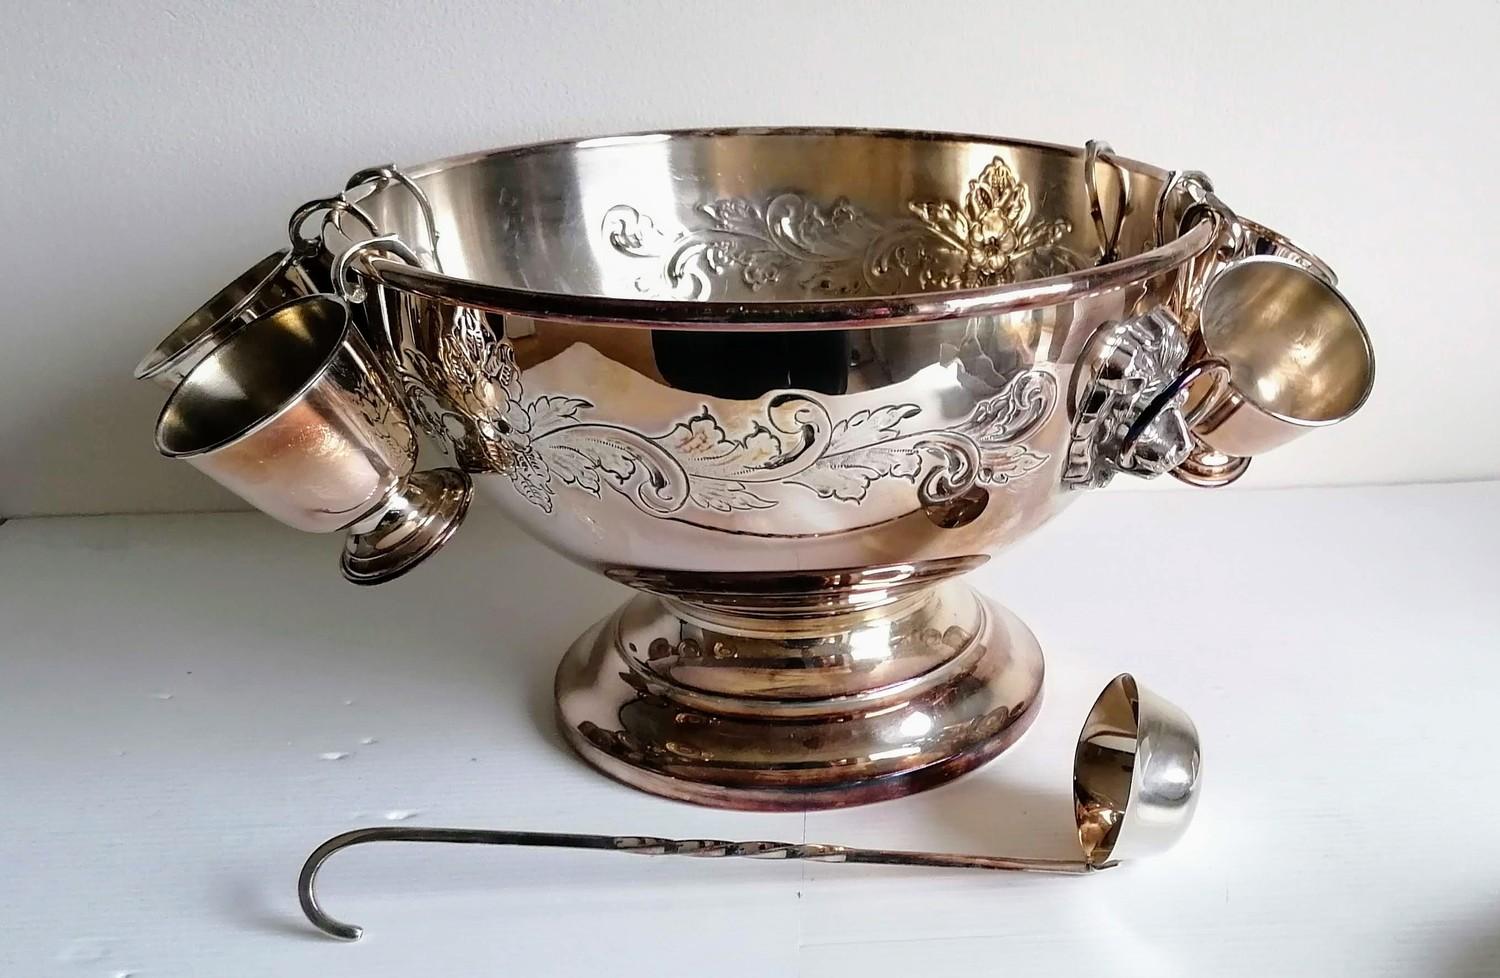 A silver plated punch bowl with lion mask handles, six goblets and a ladle, 20 x 32 cm diameter